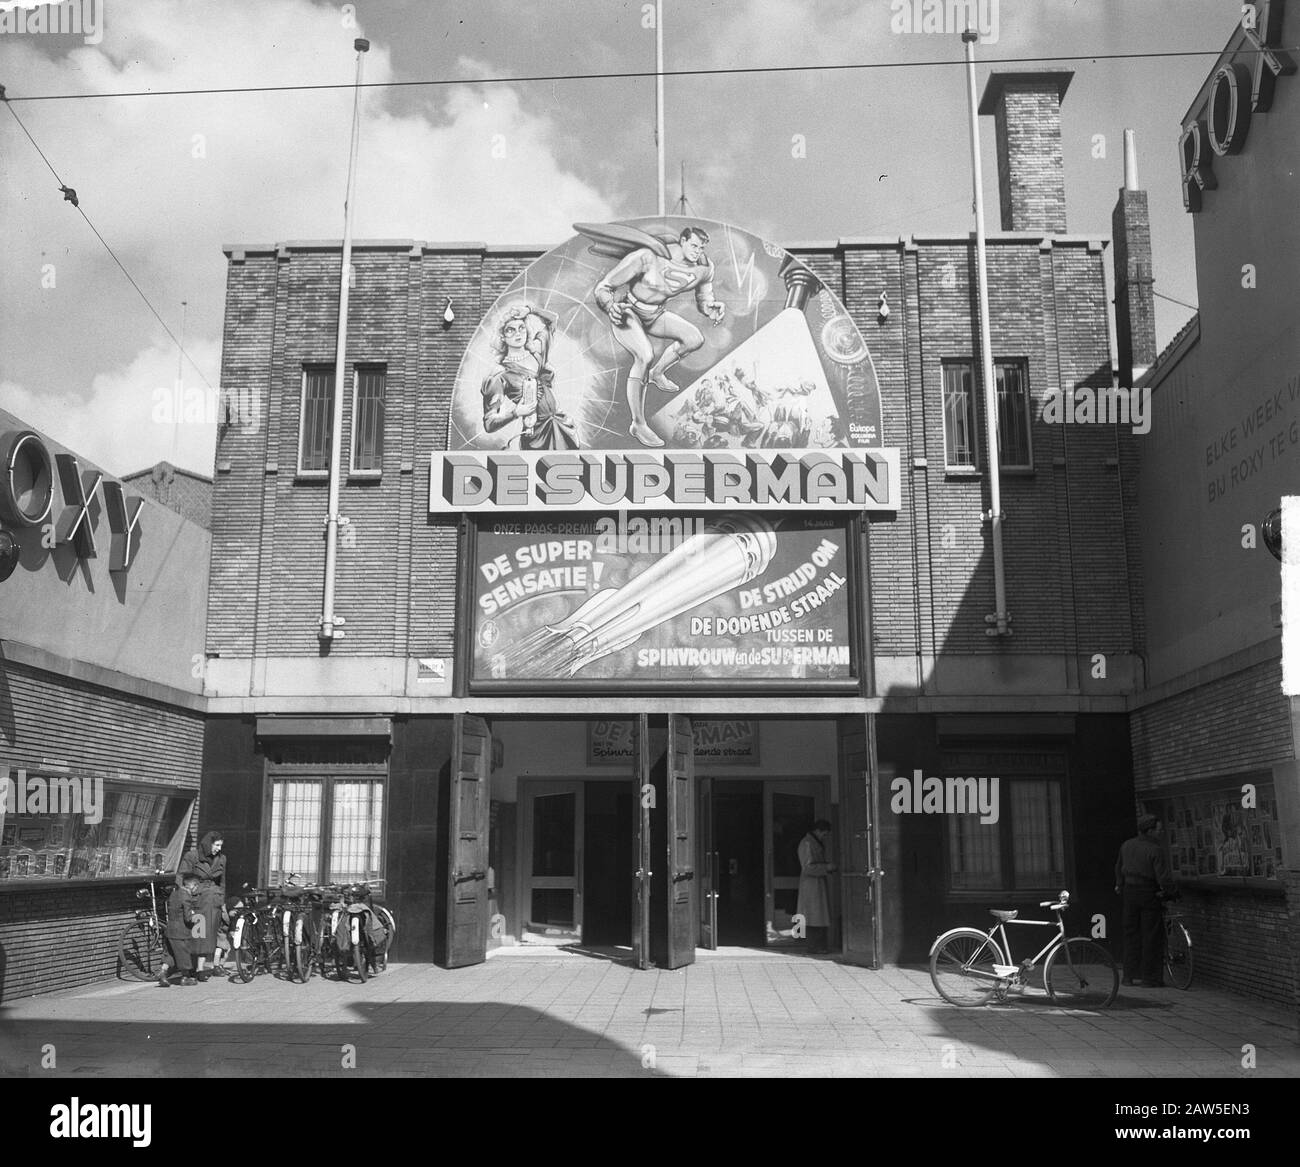 Advertising for the film Superman on the facade of the Roxy Theater Annotation: Mission Europa Film Hague Date: April 12, 1950 Location: The Hague, South Holland Keywords cinemas, advertising Institution Name: Roxy Theater Stock Photo